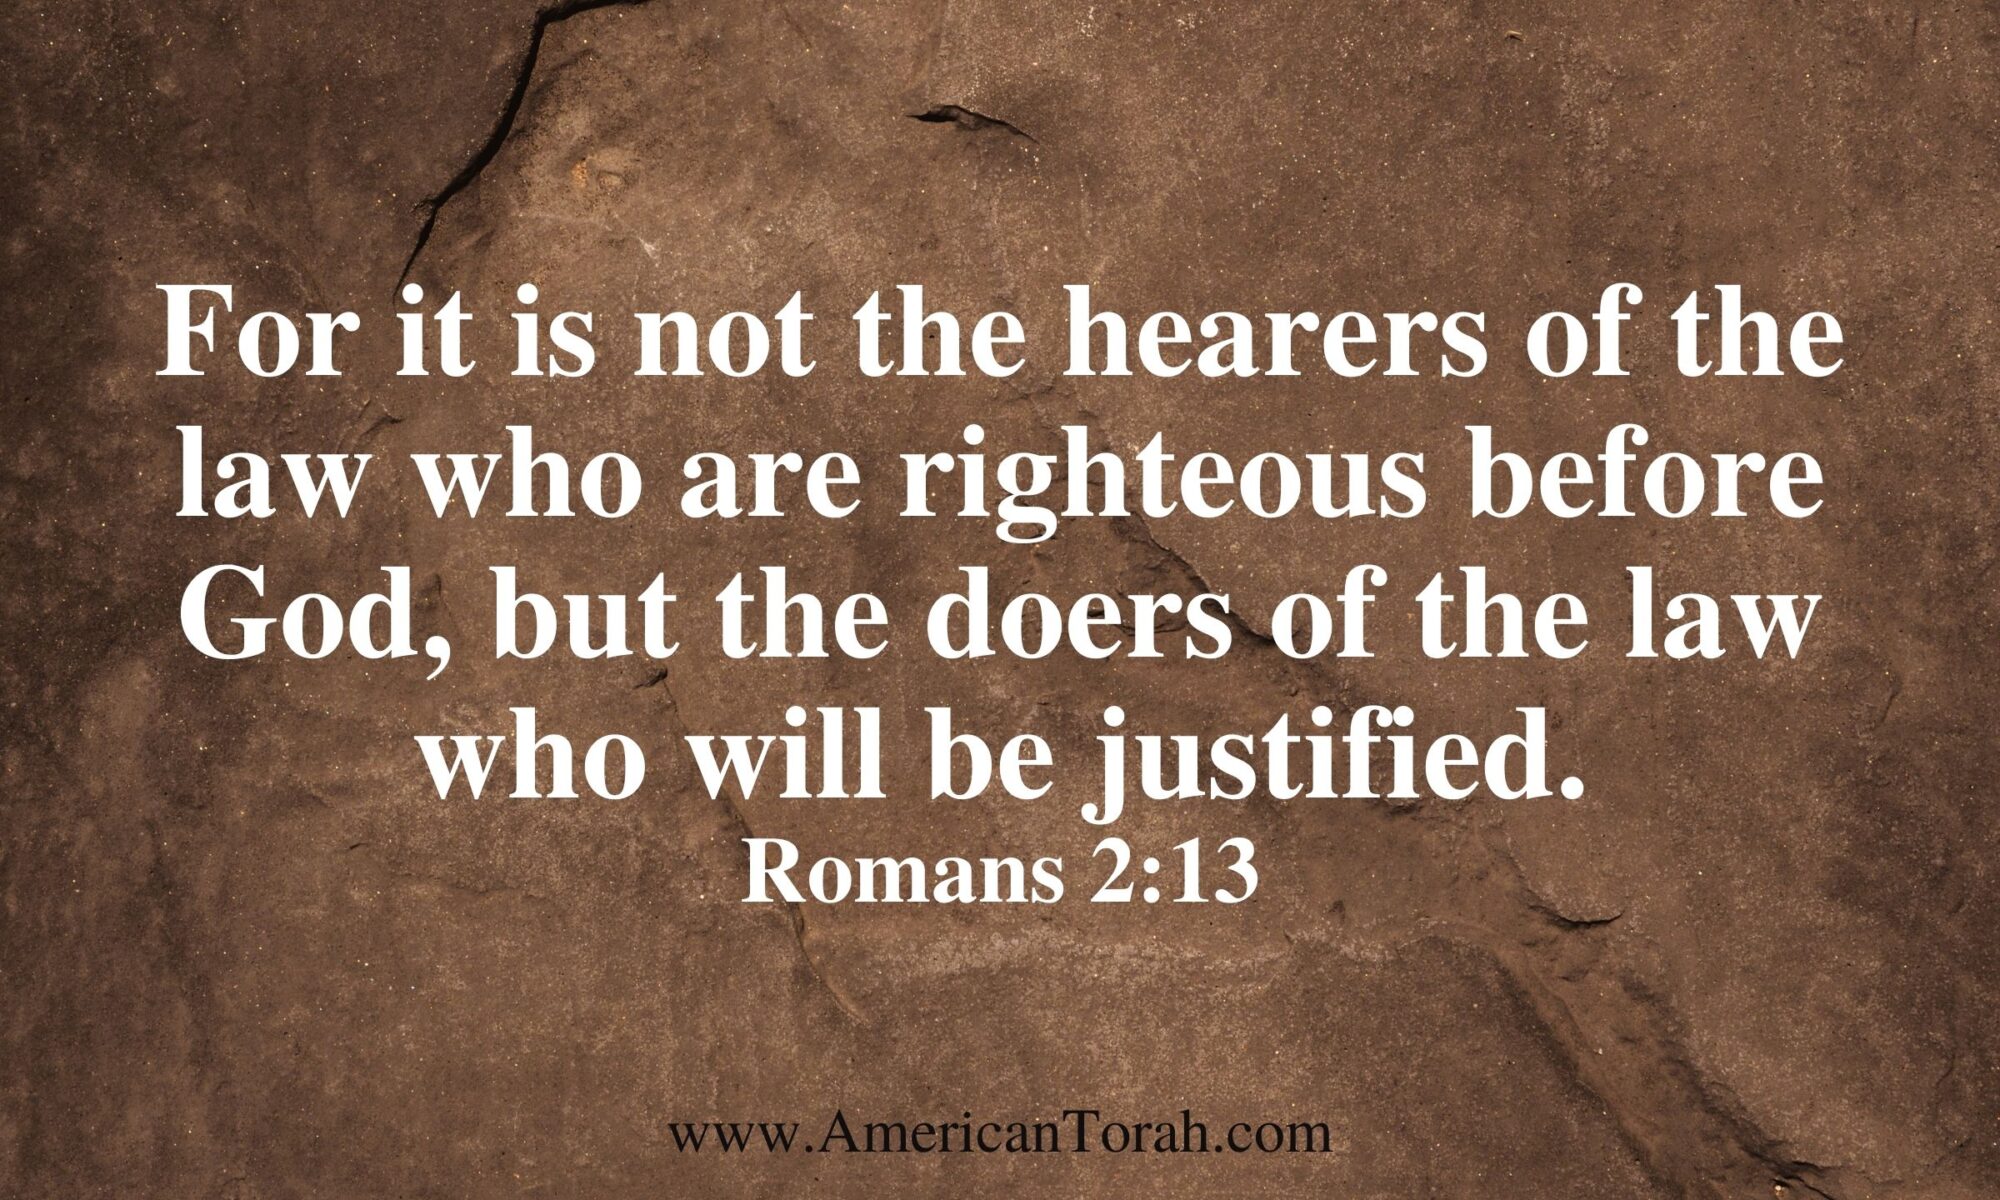 For it is not the hearers of the law who are righteous before God, but the doers of the law who will be justified. Romans 2:13